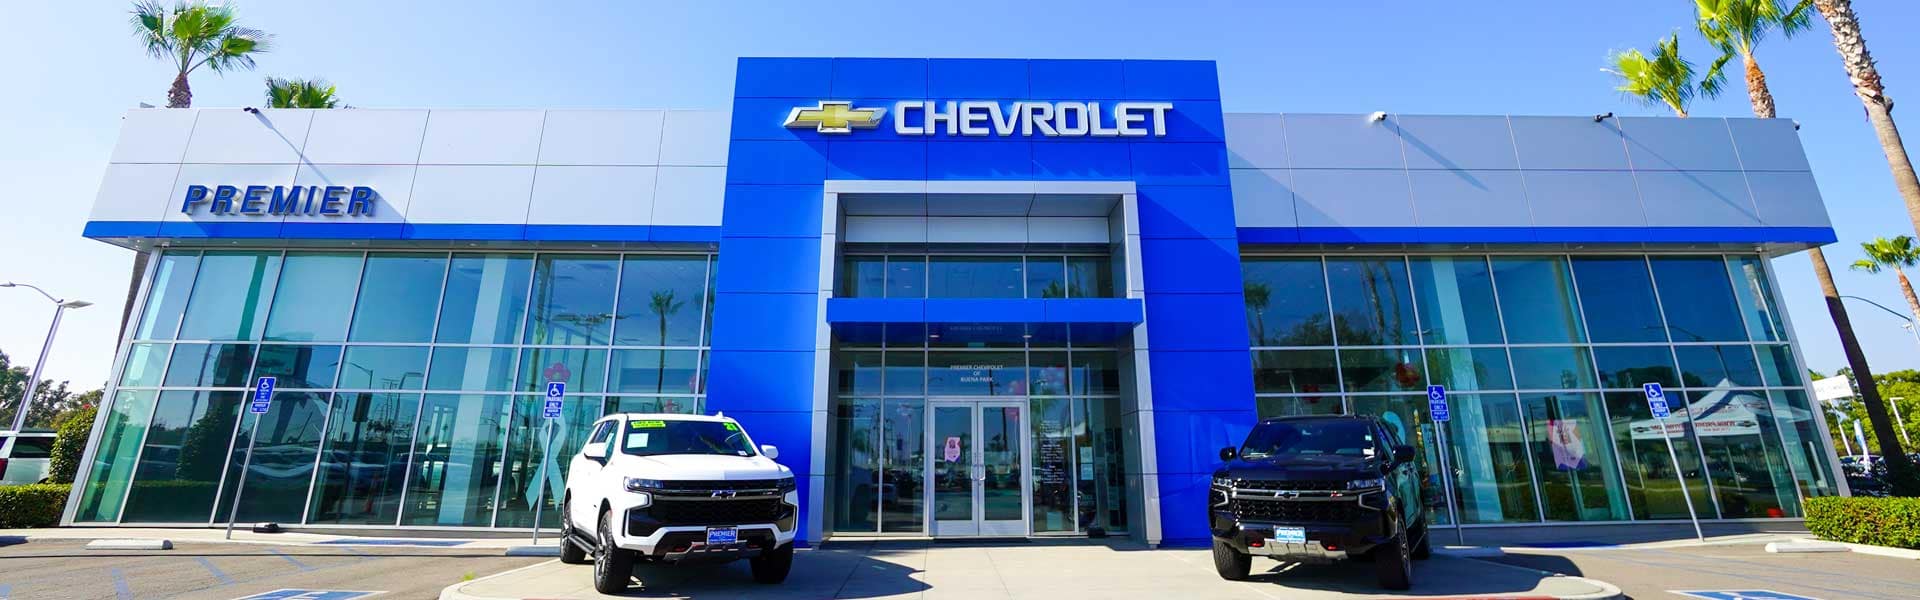 Find Your Perfect Chevy at Buena Park's Premier Chevrolet Dealer